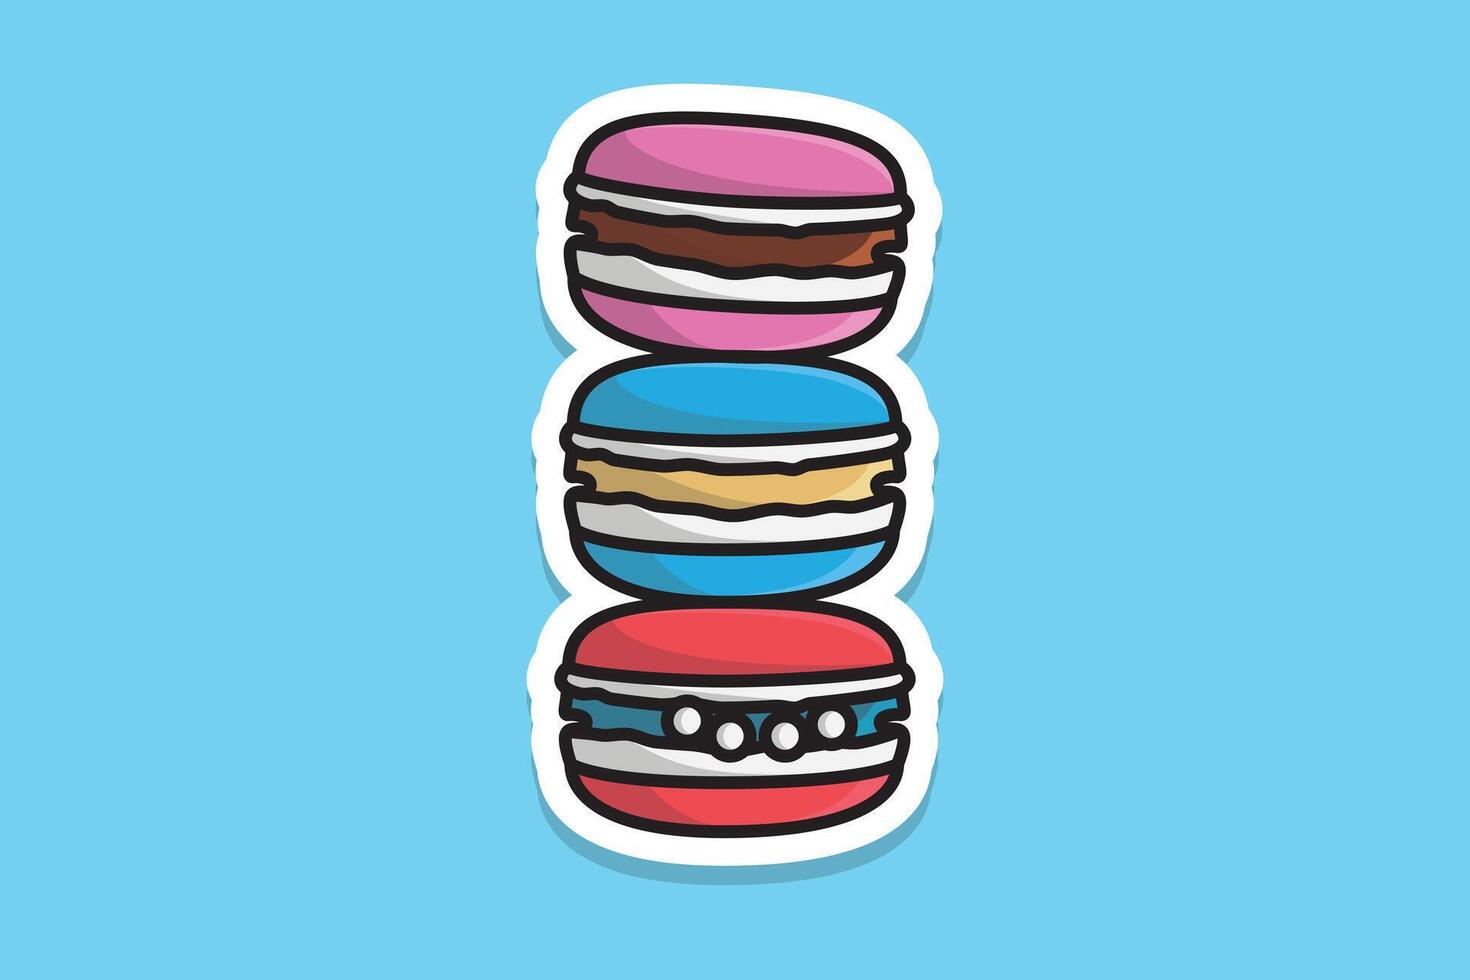 Set of Donuts with Icing Sticker vector illustration. Food objects icon concept. Set of colorful glossy donuts with glaze and powder sticker vector design with shadow.